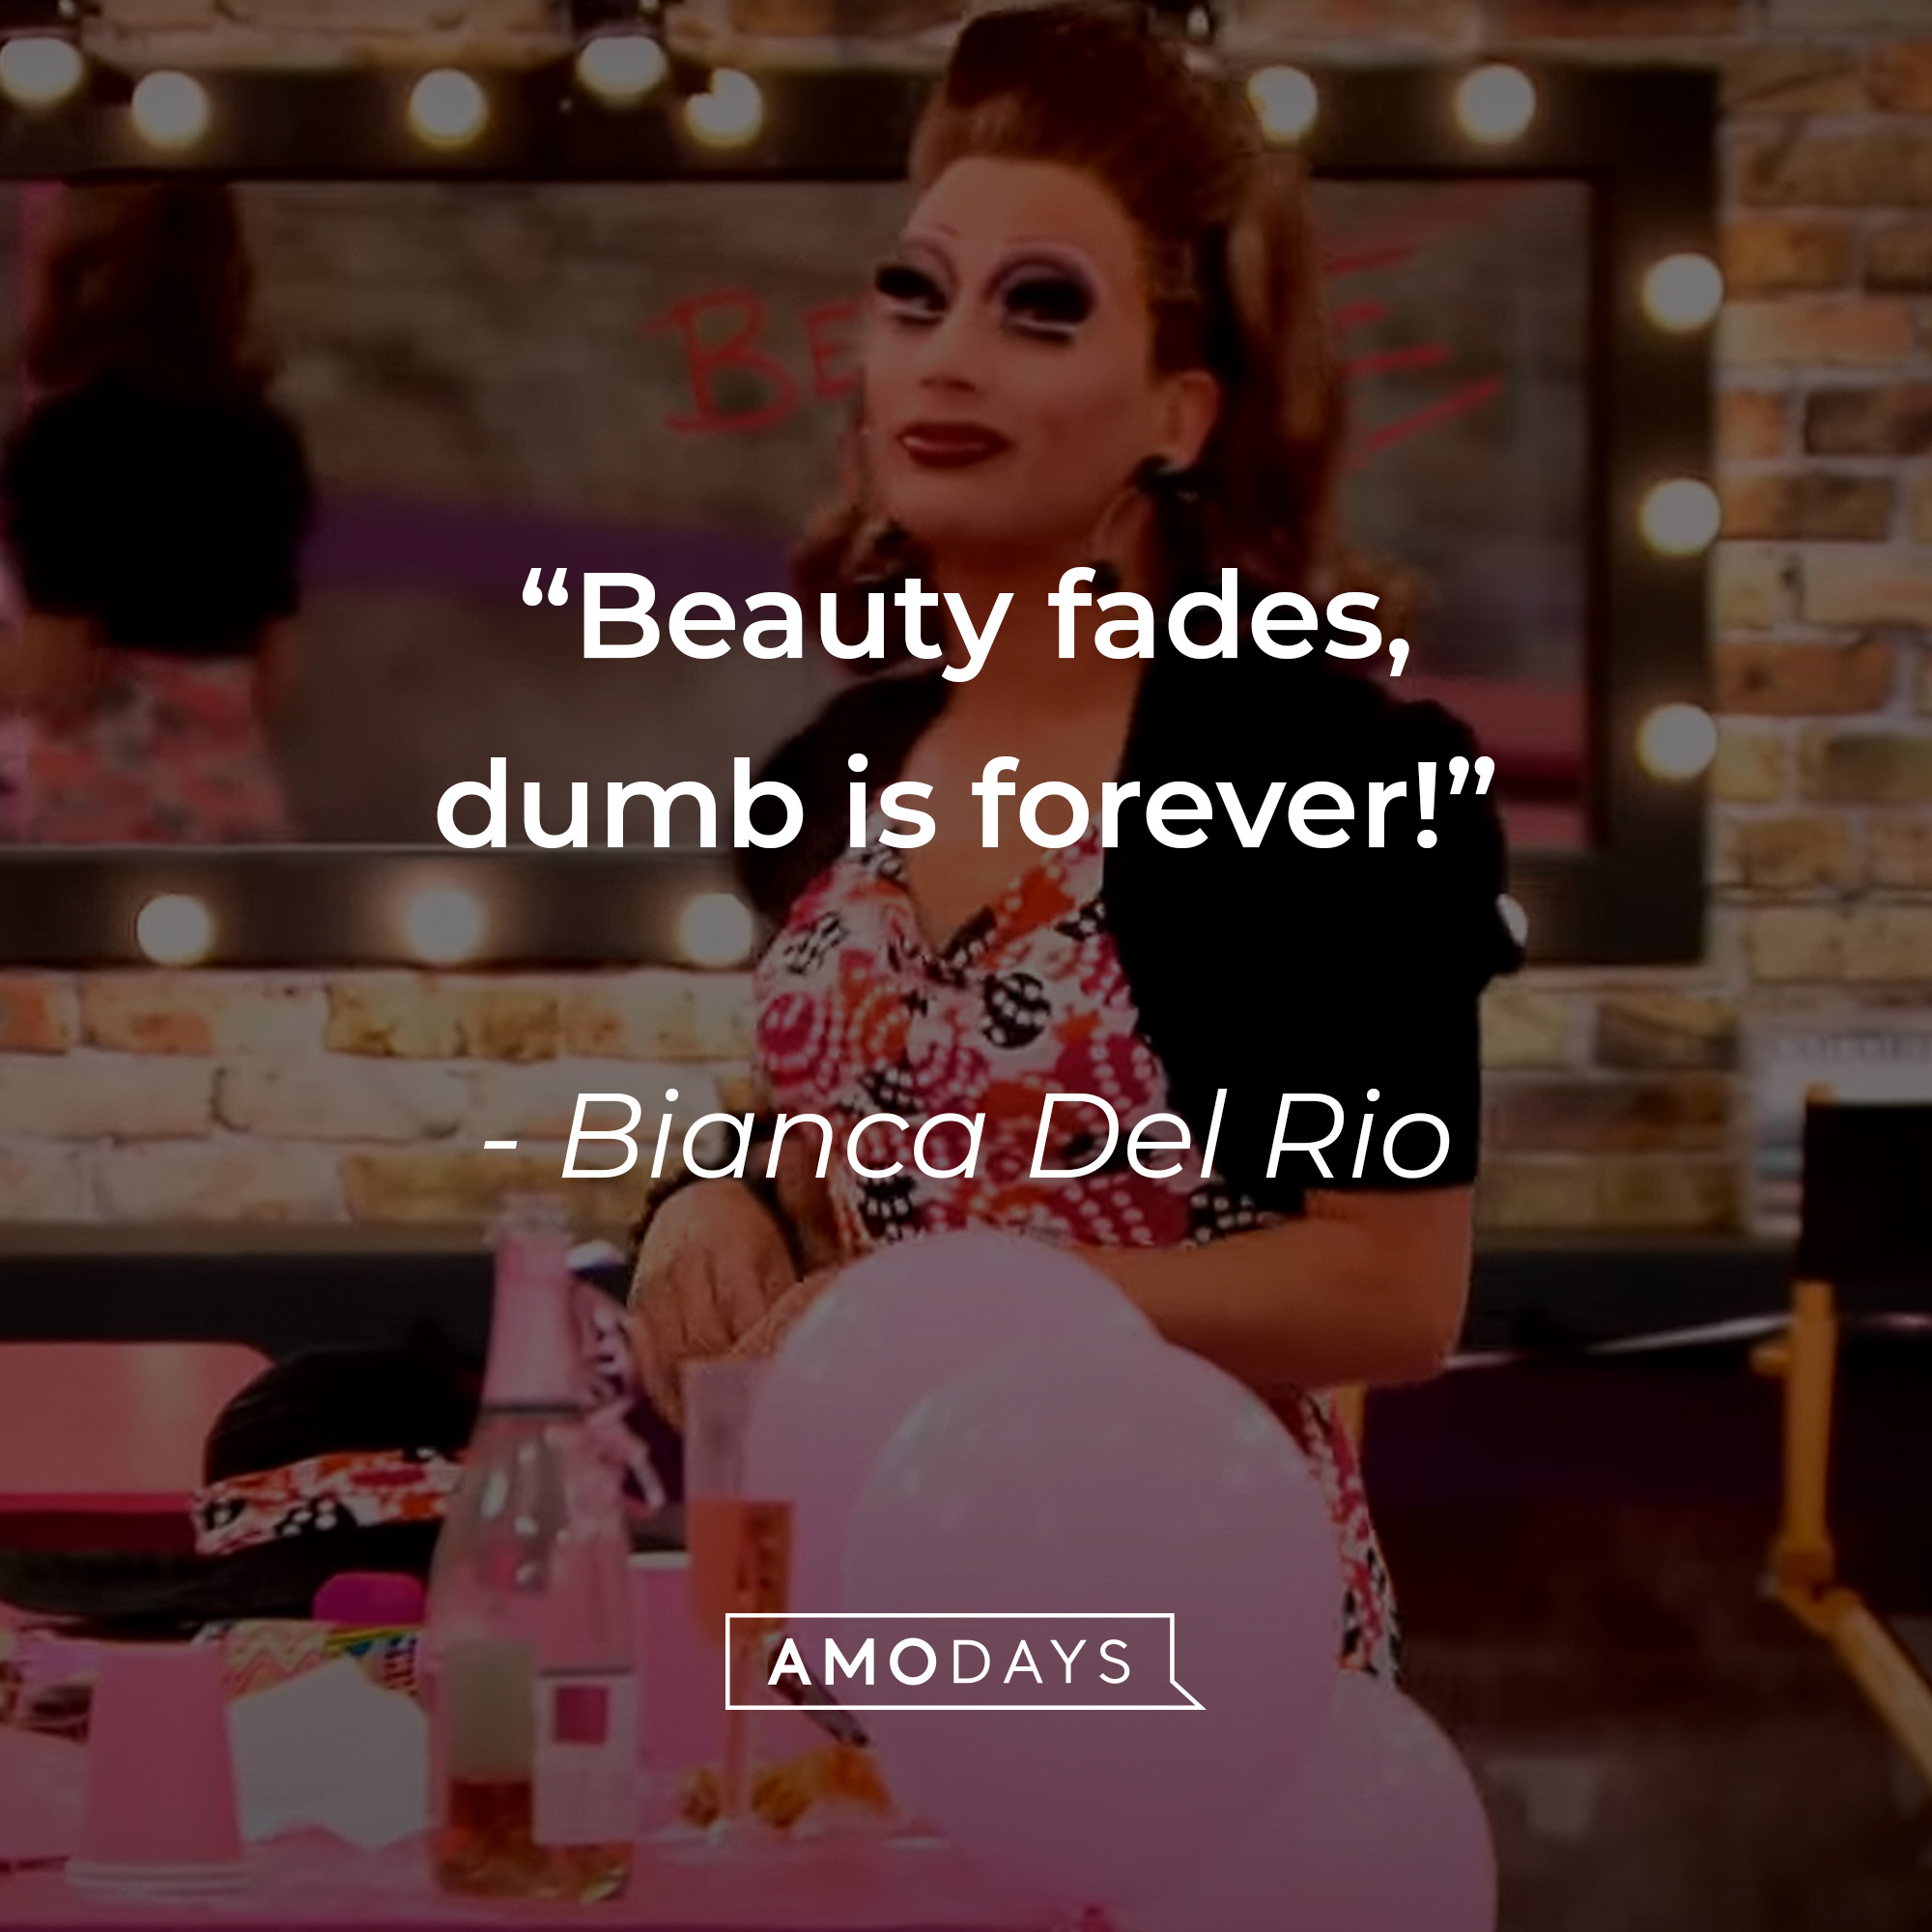 Bianca Del Rio's quote: “Beauty fades, dumb is forever!” | Source: youtube.com/rupaulsdragrace